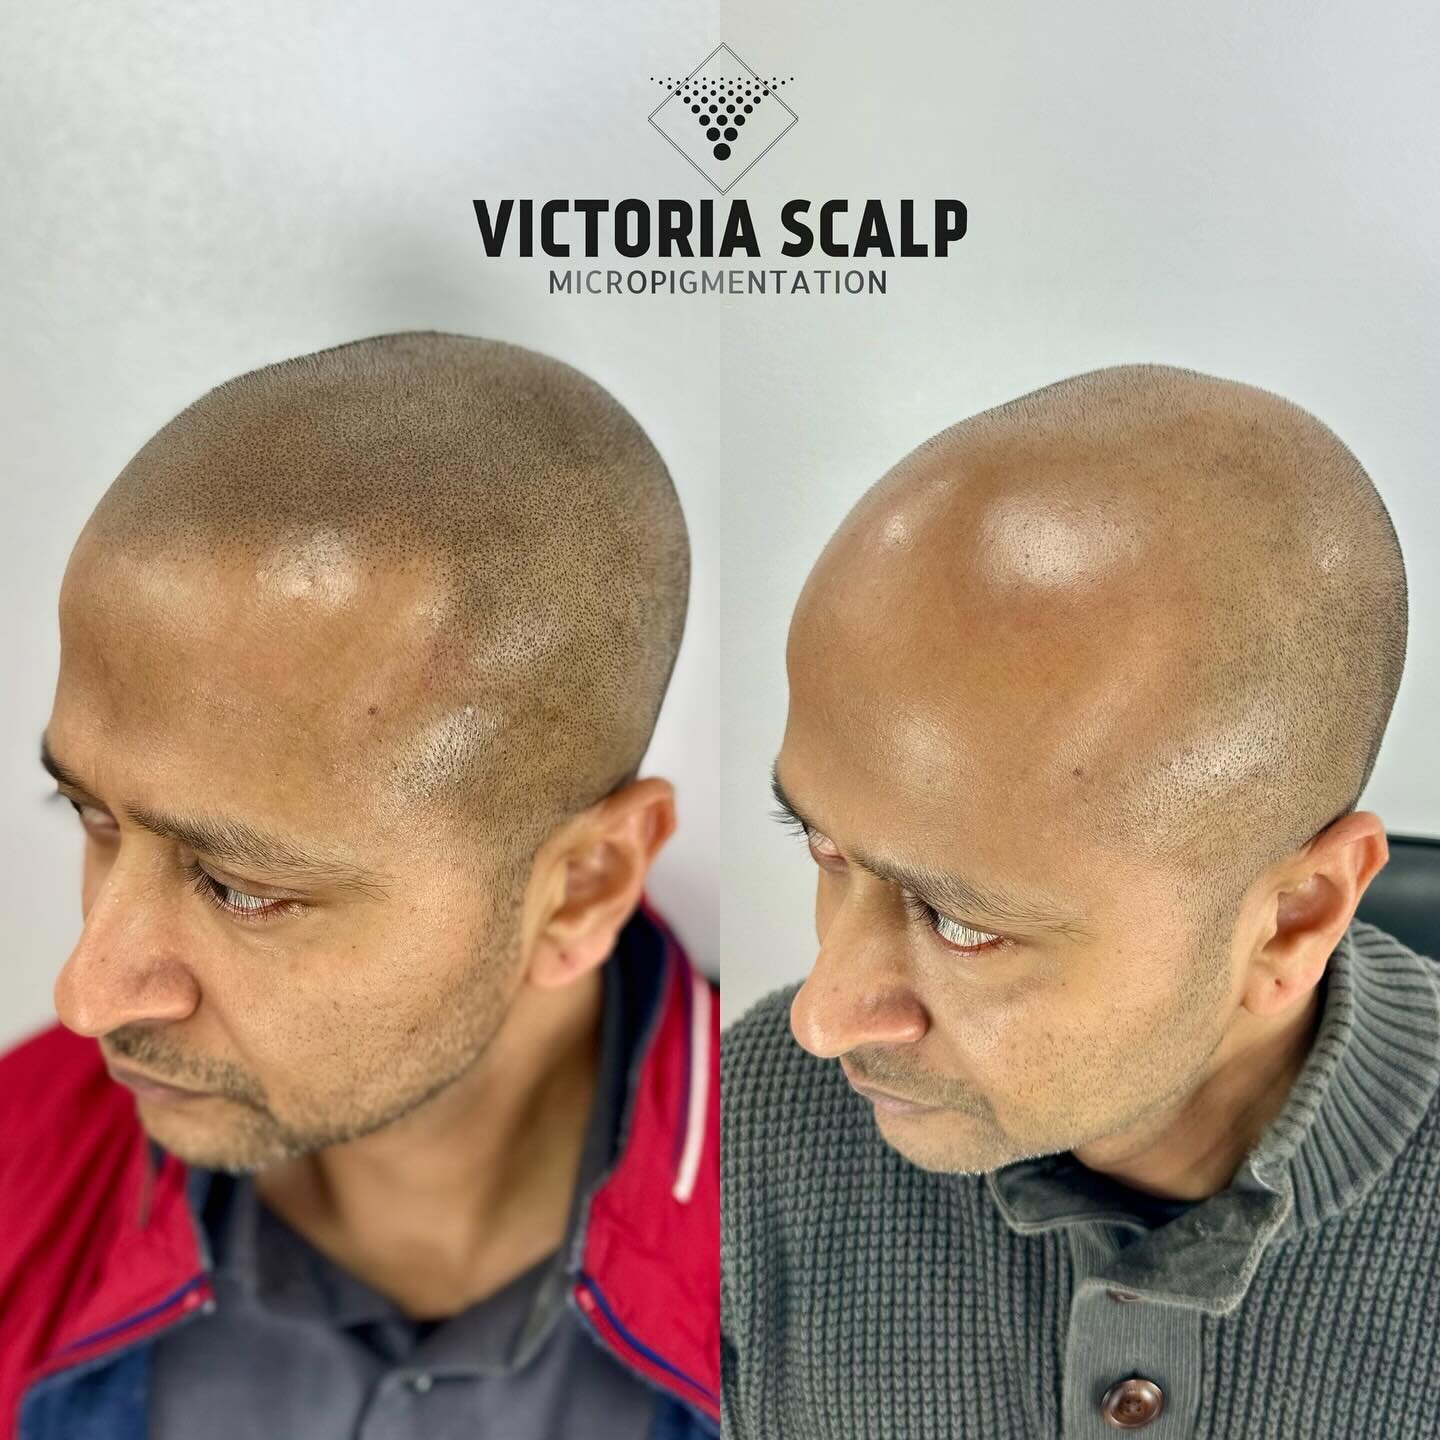 &bull;NATURAL HAIRLINE SMP&bull; 🔥🔥🔥
Before &amp; After 3 Sessions

&gt;&gt;&gt;SWIPE for full zoomable images 

As always, we will check in after a couple months to make sure everything is 💯 perfect for him. 

We want our clients to look and fee